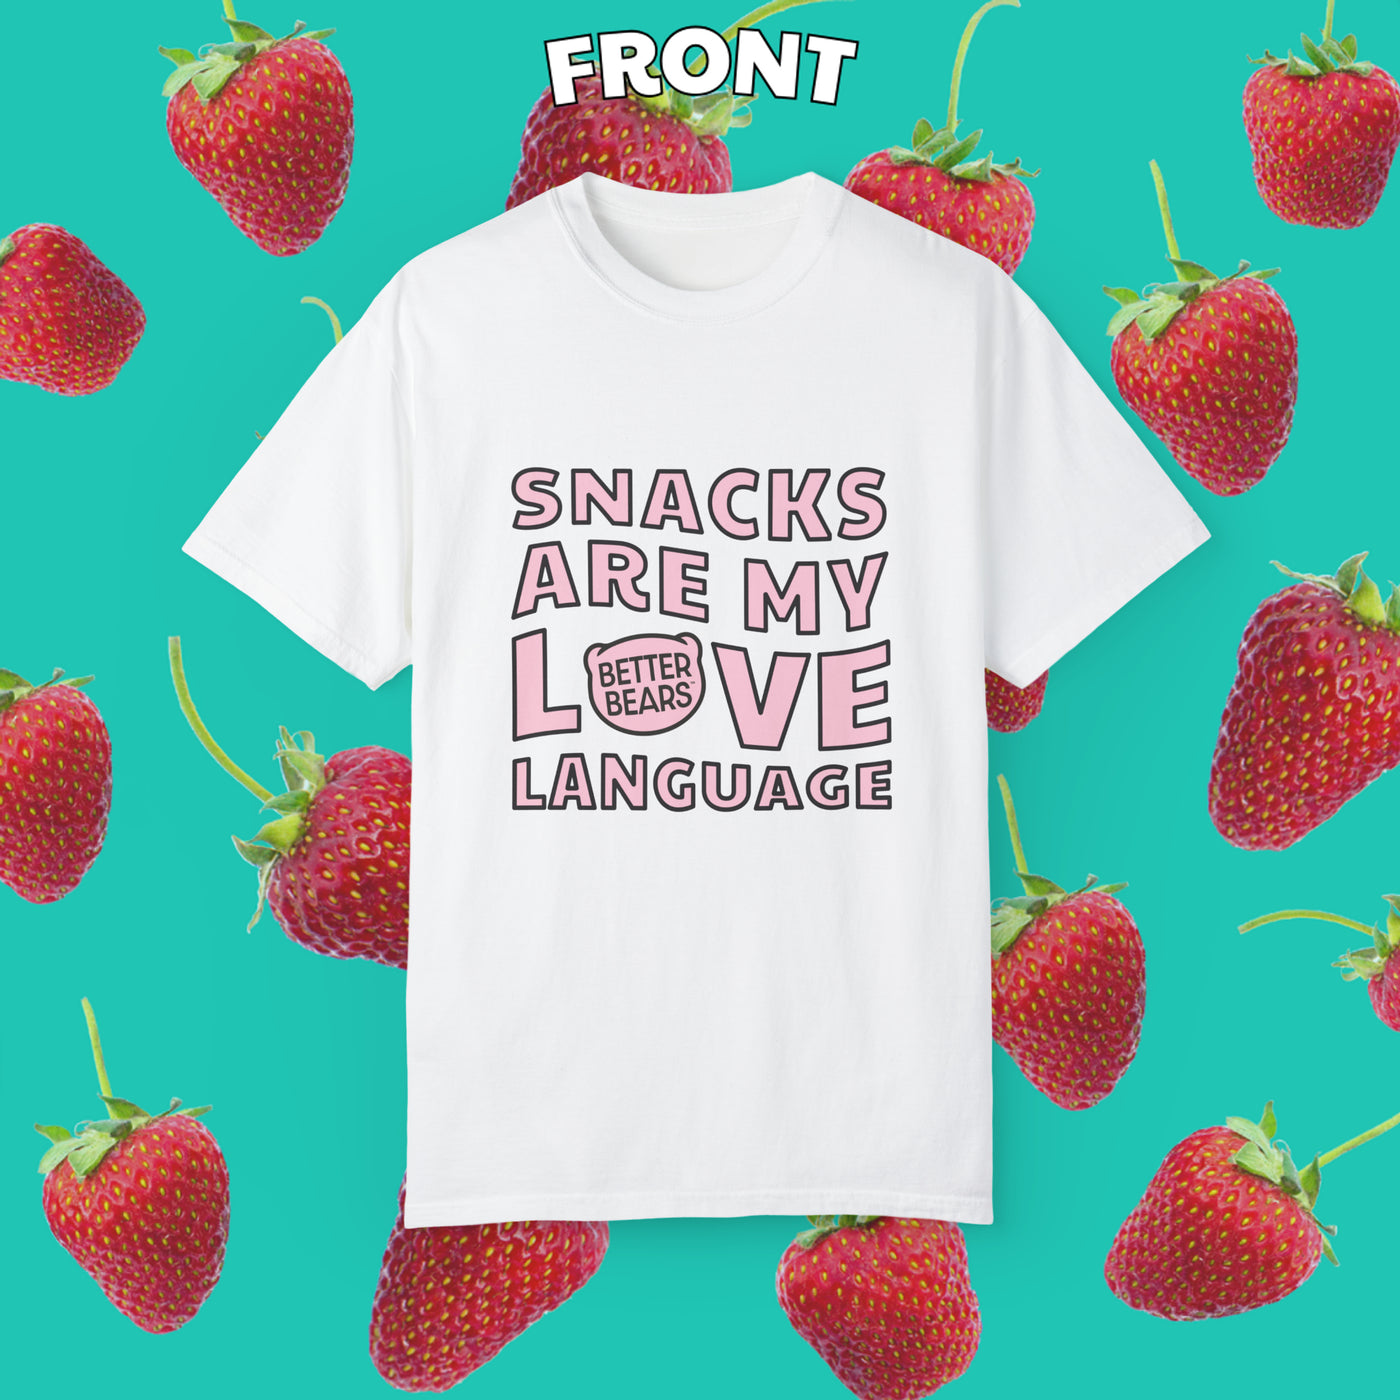 Snacks Are My Love Language - Unisex T-shirt - Limited Edition Valentines Day